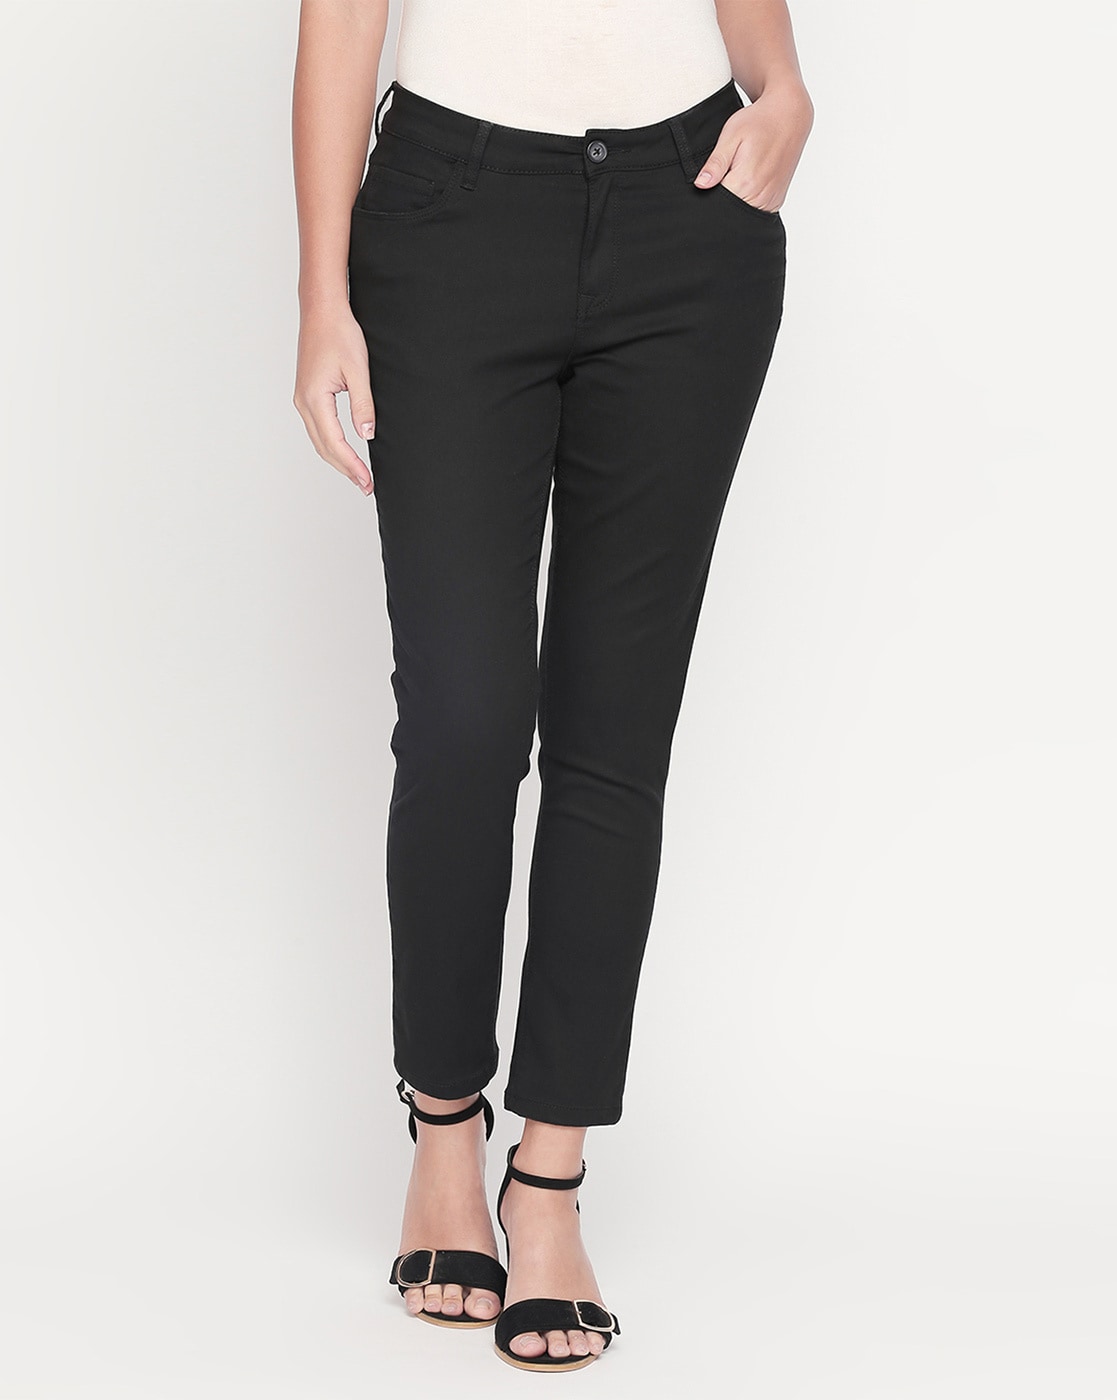 Honey Rust Solid AnkleLength Casual Women Comfort Fit Trousers  Selling  Fast at Pantaloonscom